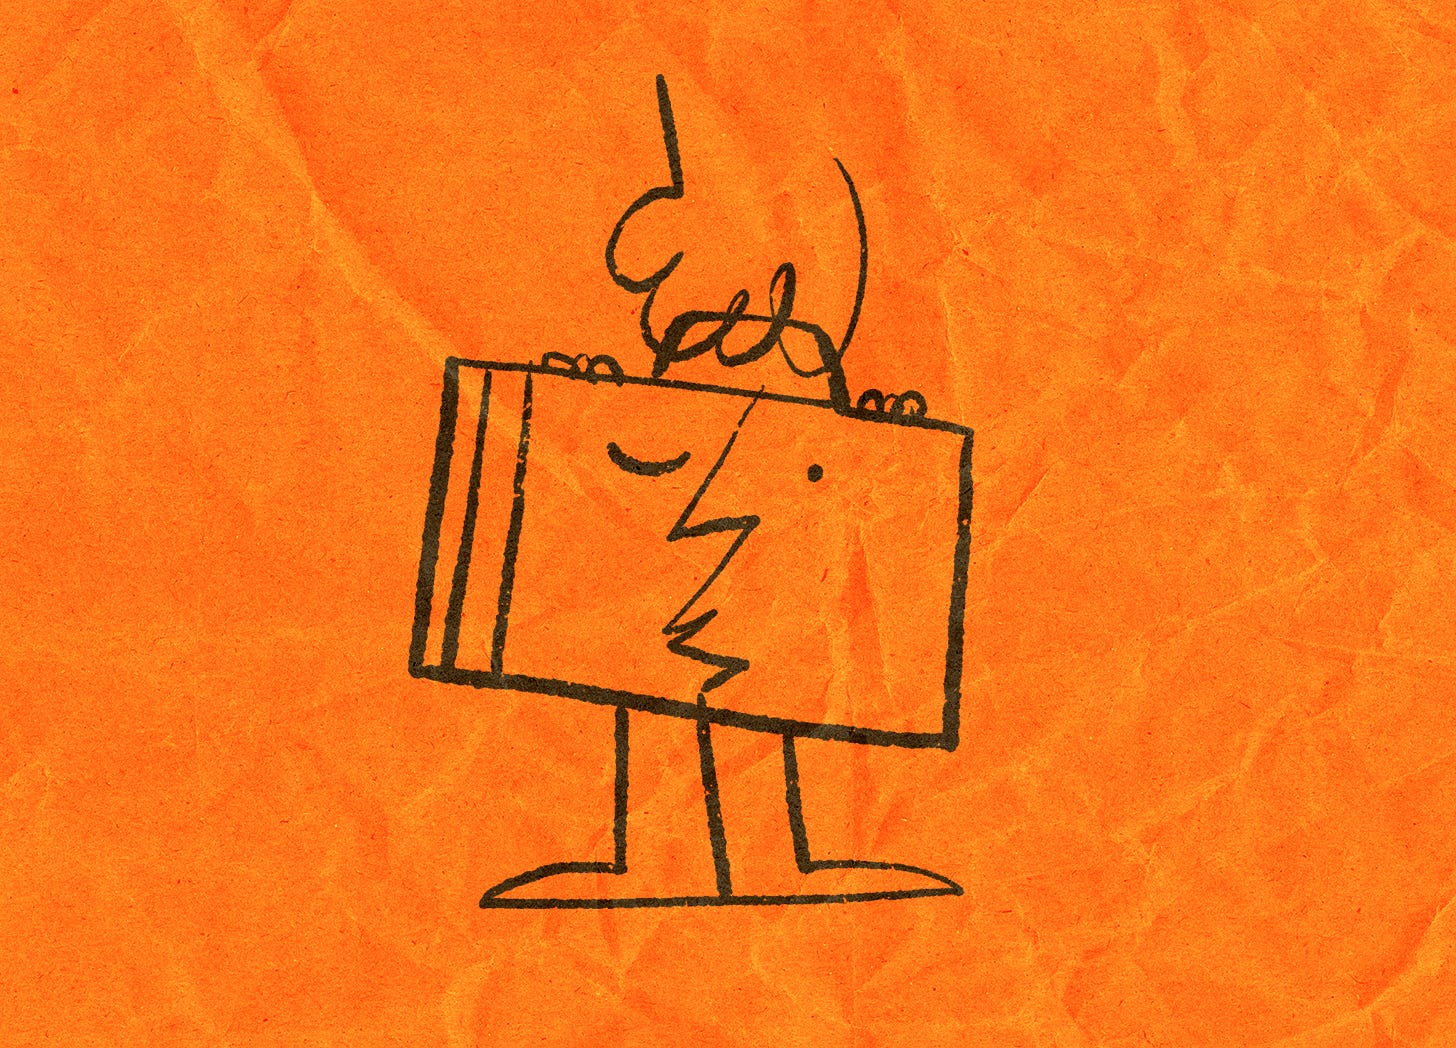 Illustration, in pencil, of a briefcase with a fece and legs being picked up by a hand, all set on a textured orange background